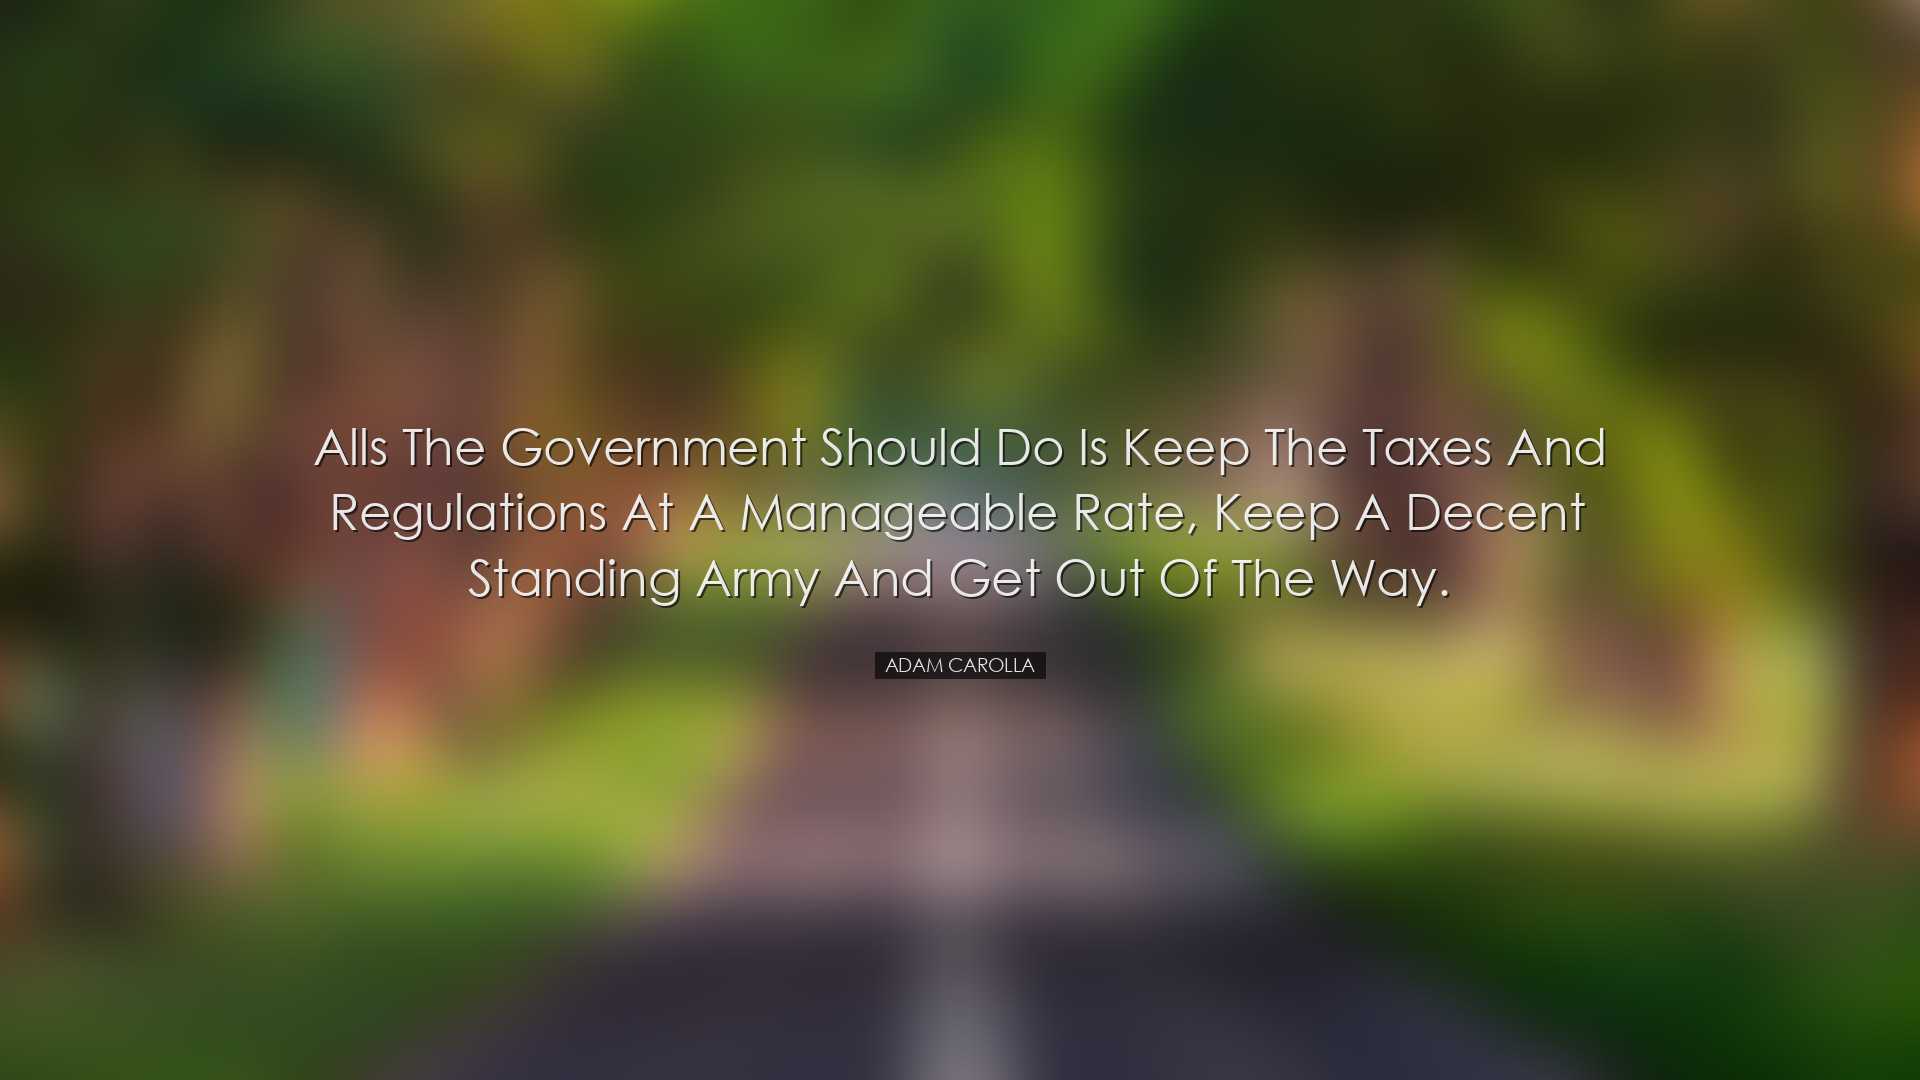 Alls the government should do is keep the taxes and regulations at